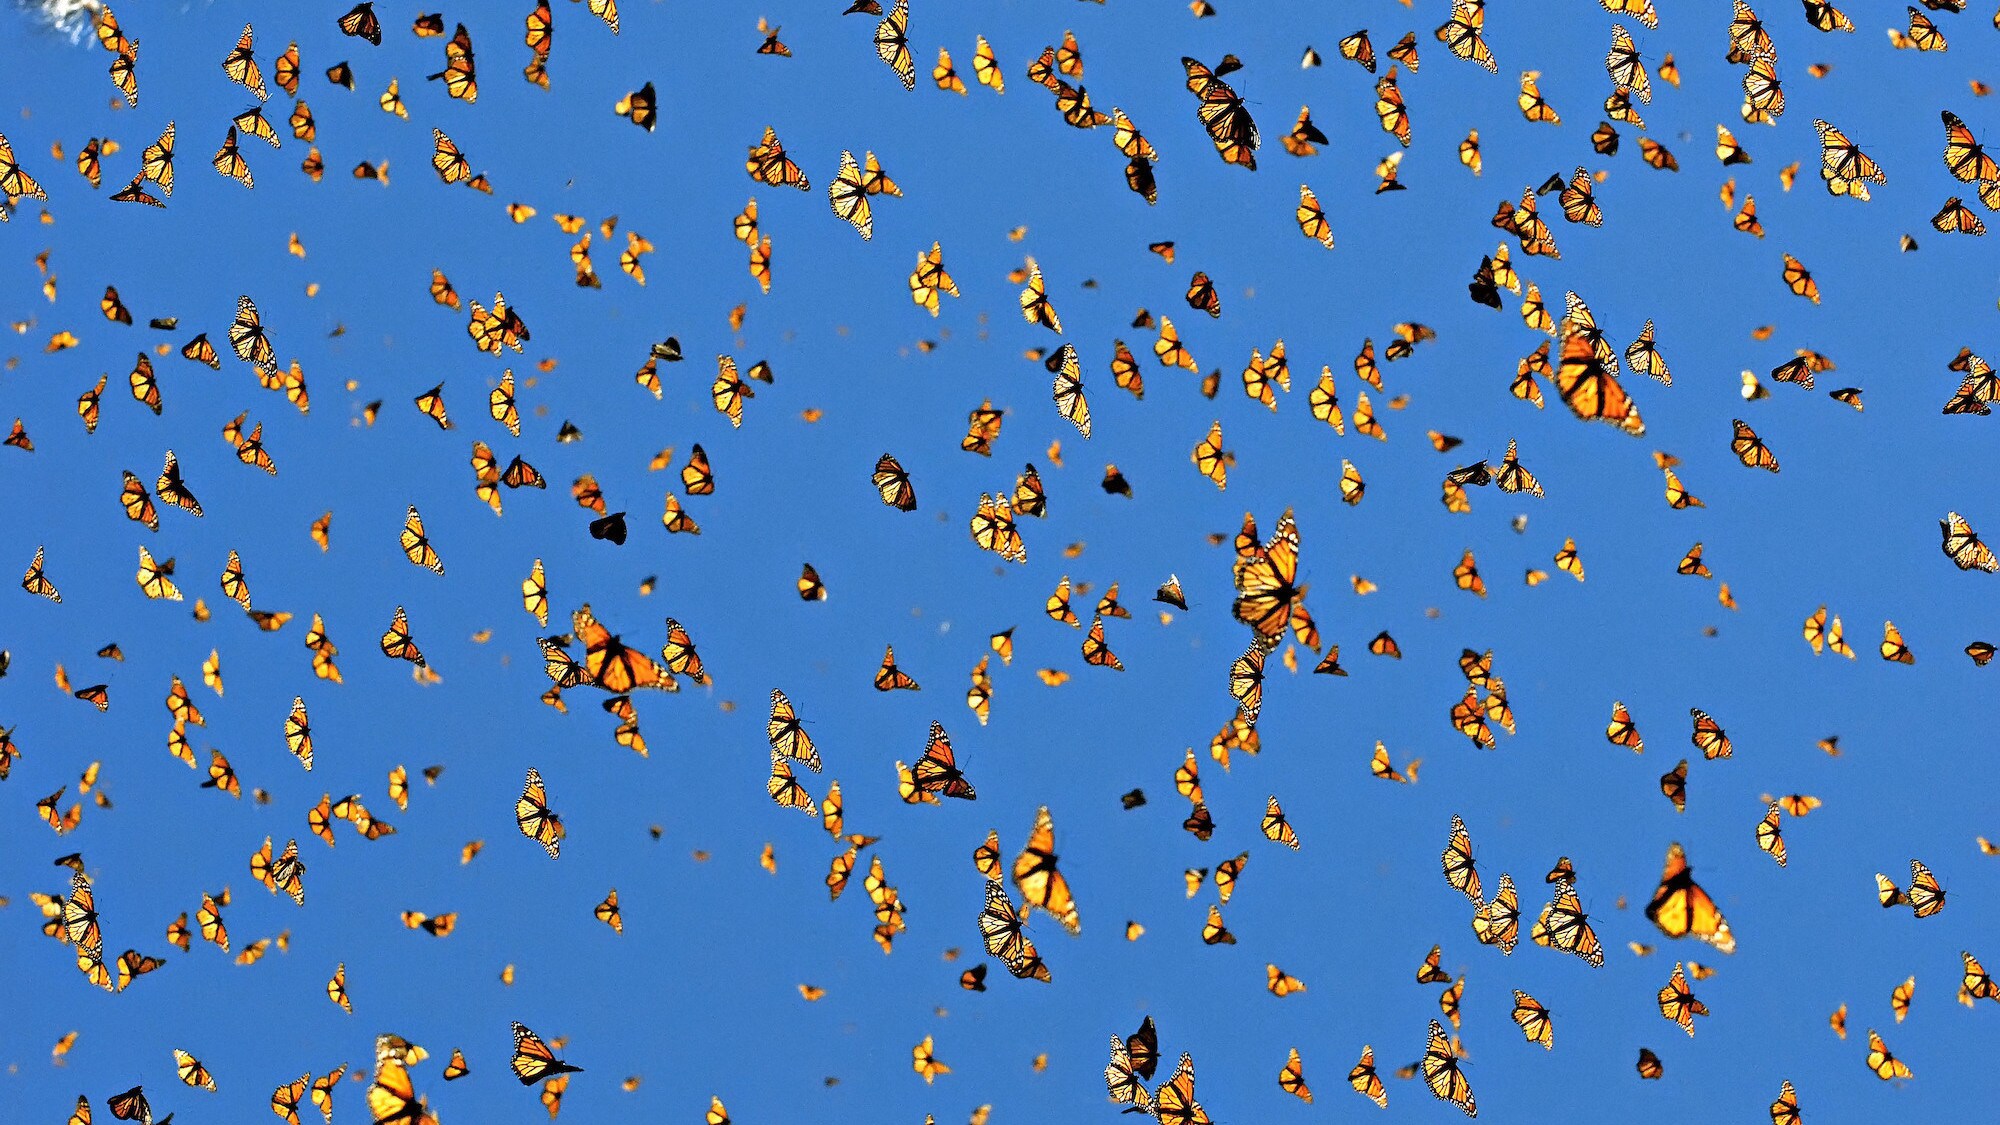 A "burst" of monarch butterflies flies with blue skies in the background. Monarchs are featured in the "Braving the Backyard" episode of "A Real Bug's Life." (National Geographic/Medford Taylor)